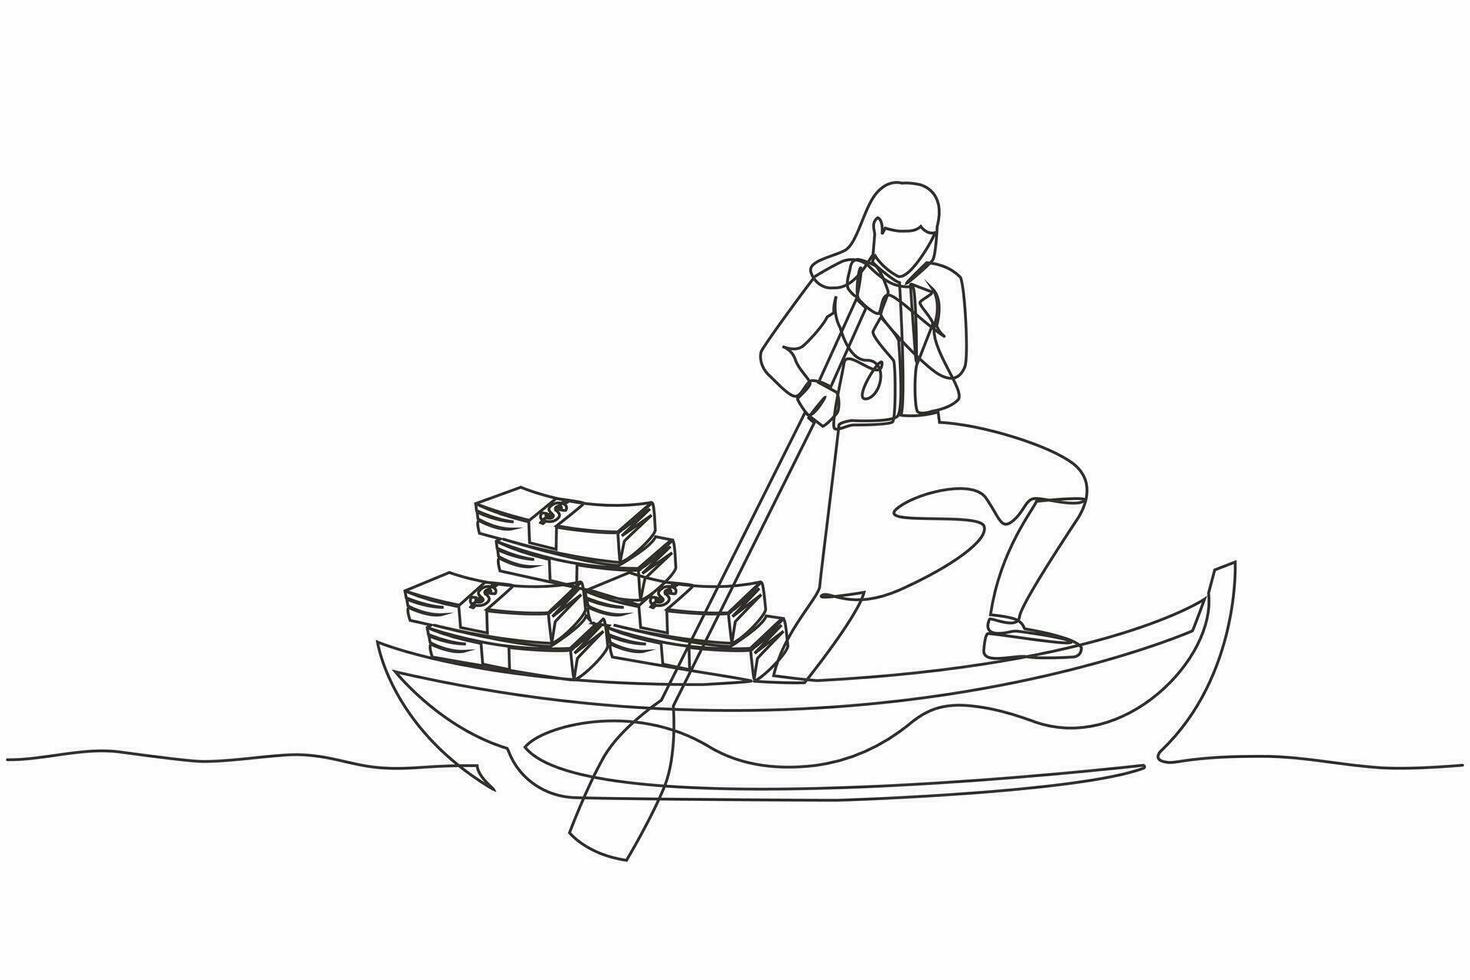 Single continuous line drawing businesswoman sailing away on boat with pile of banknote. Escape with money. Financial crime, tax evasion, money laundering. One line graphic design vector illustration